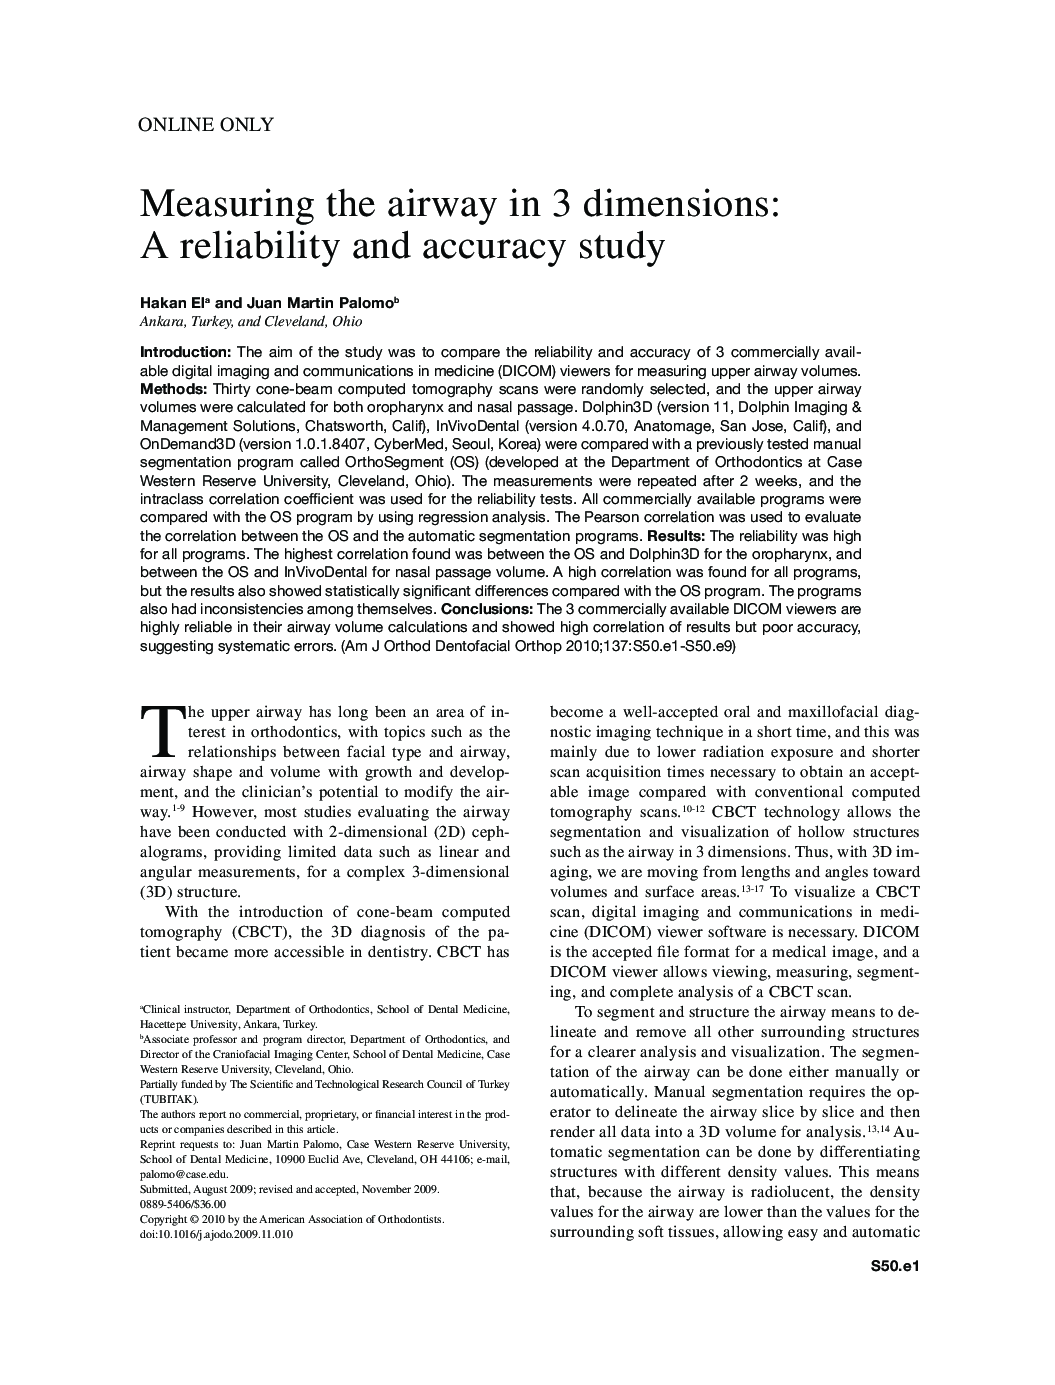 Measuring the airway in 3 dimensions: A reliability and accuracy study